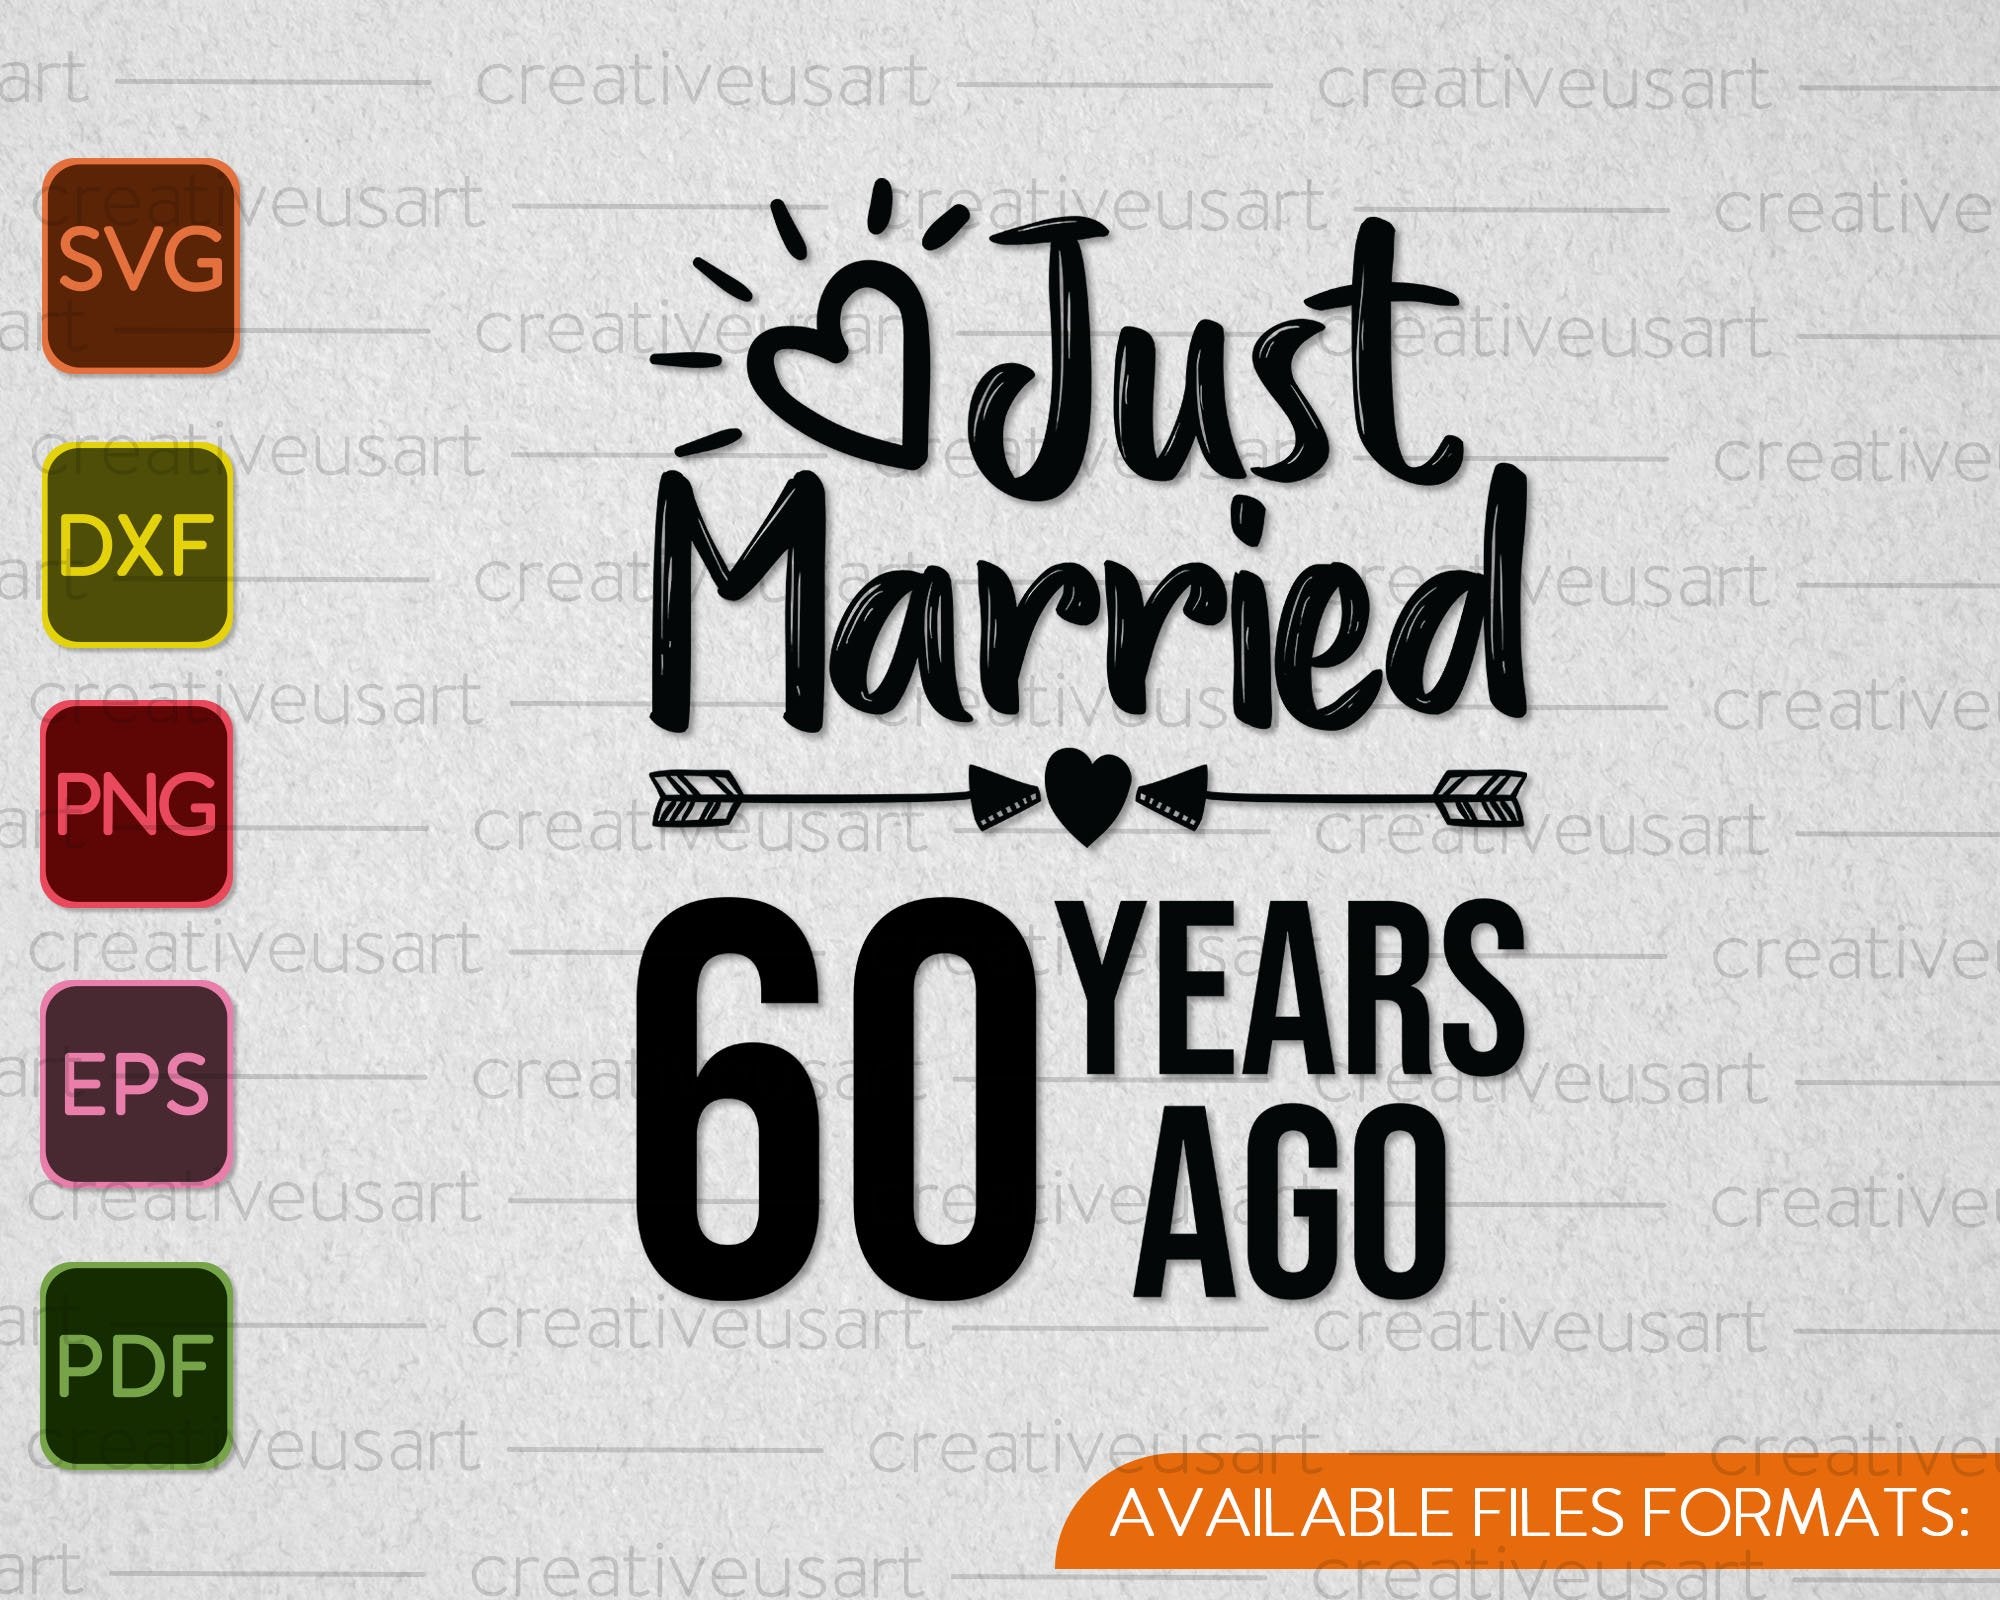 Download Just Married 60 Years Ago Svg Png Files Creativeusarts